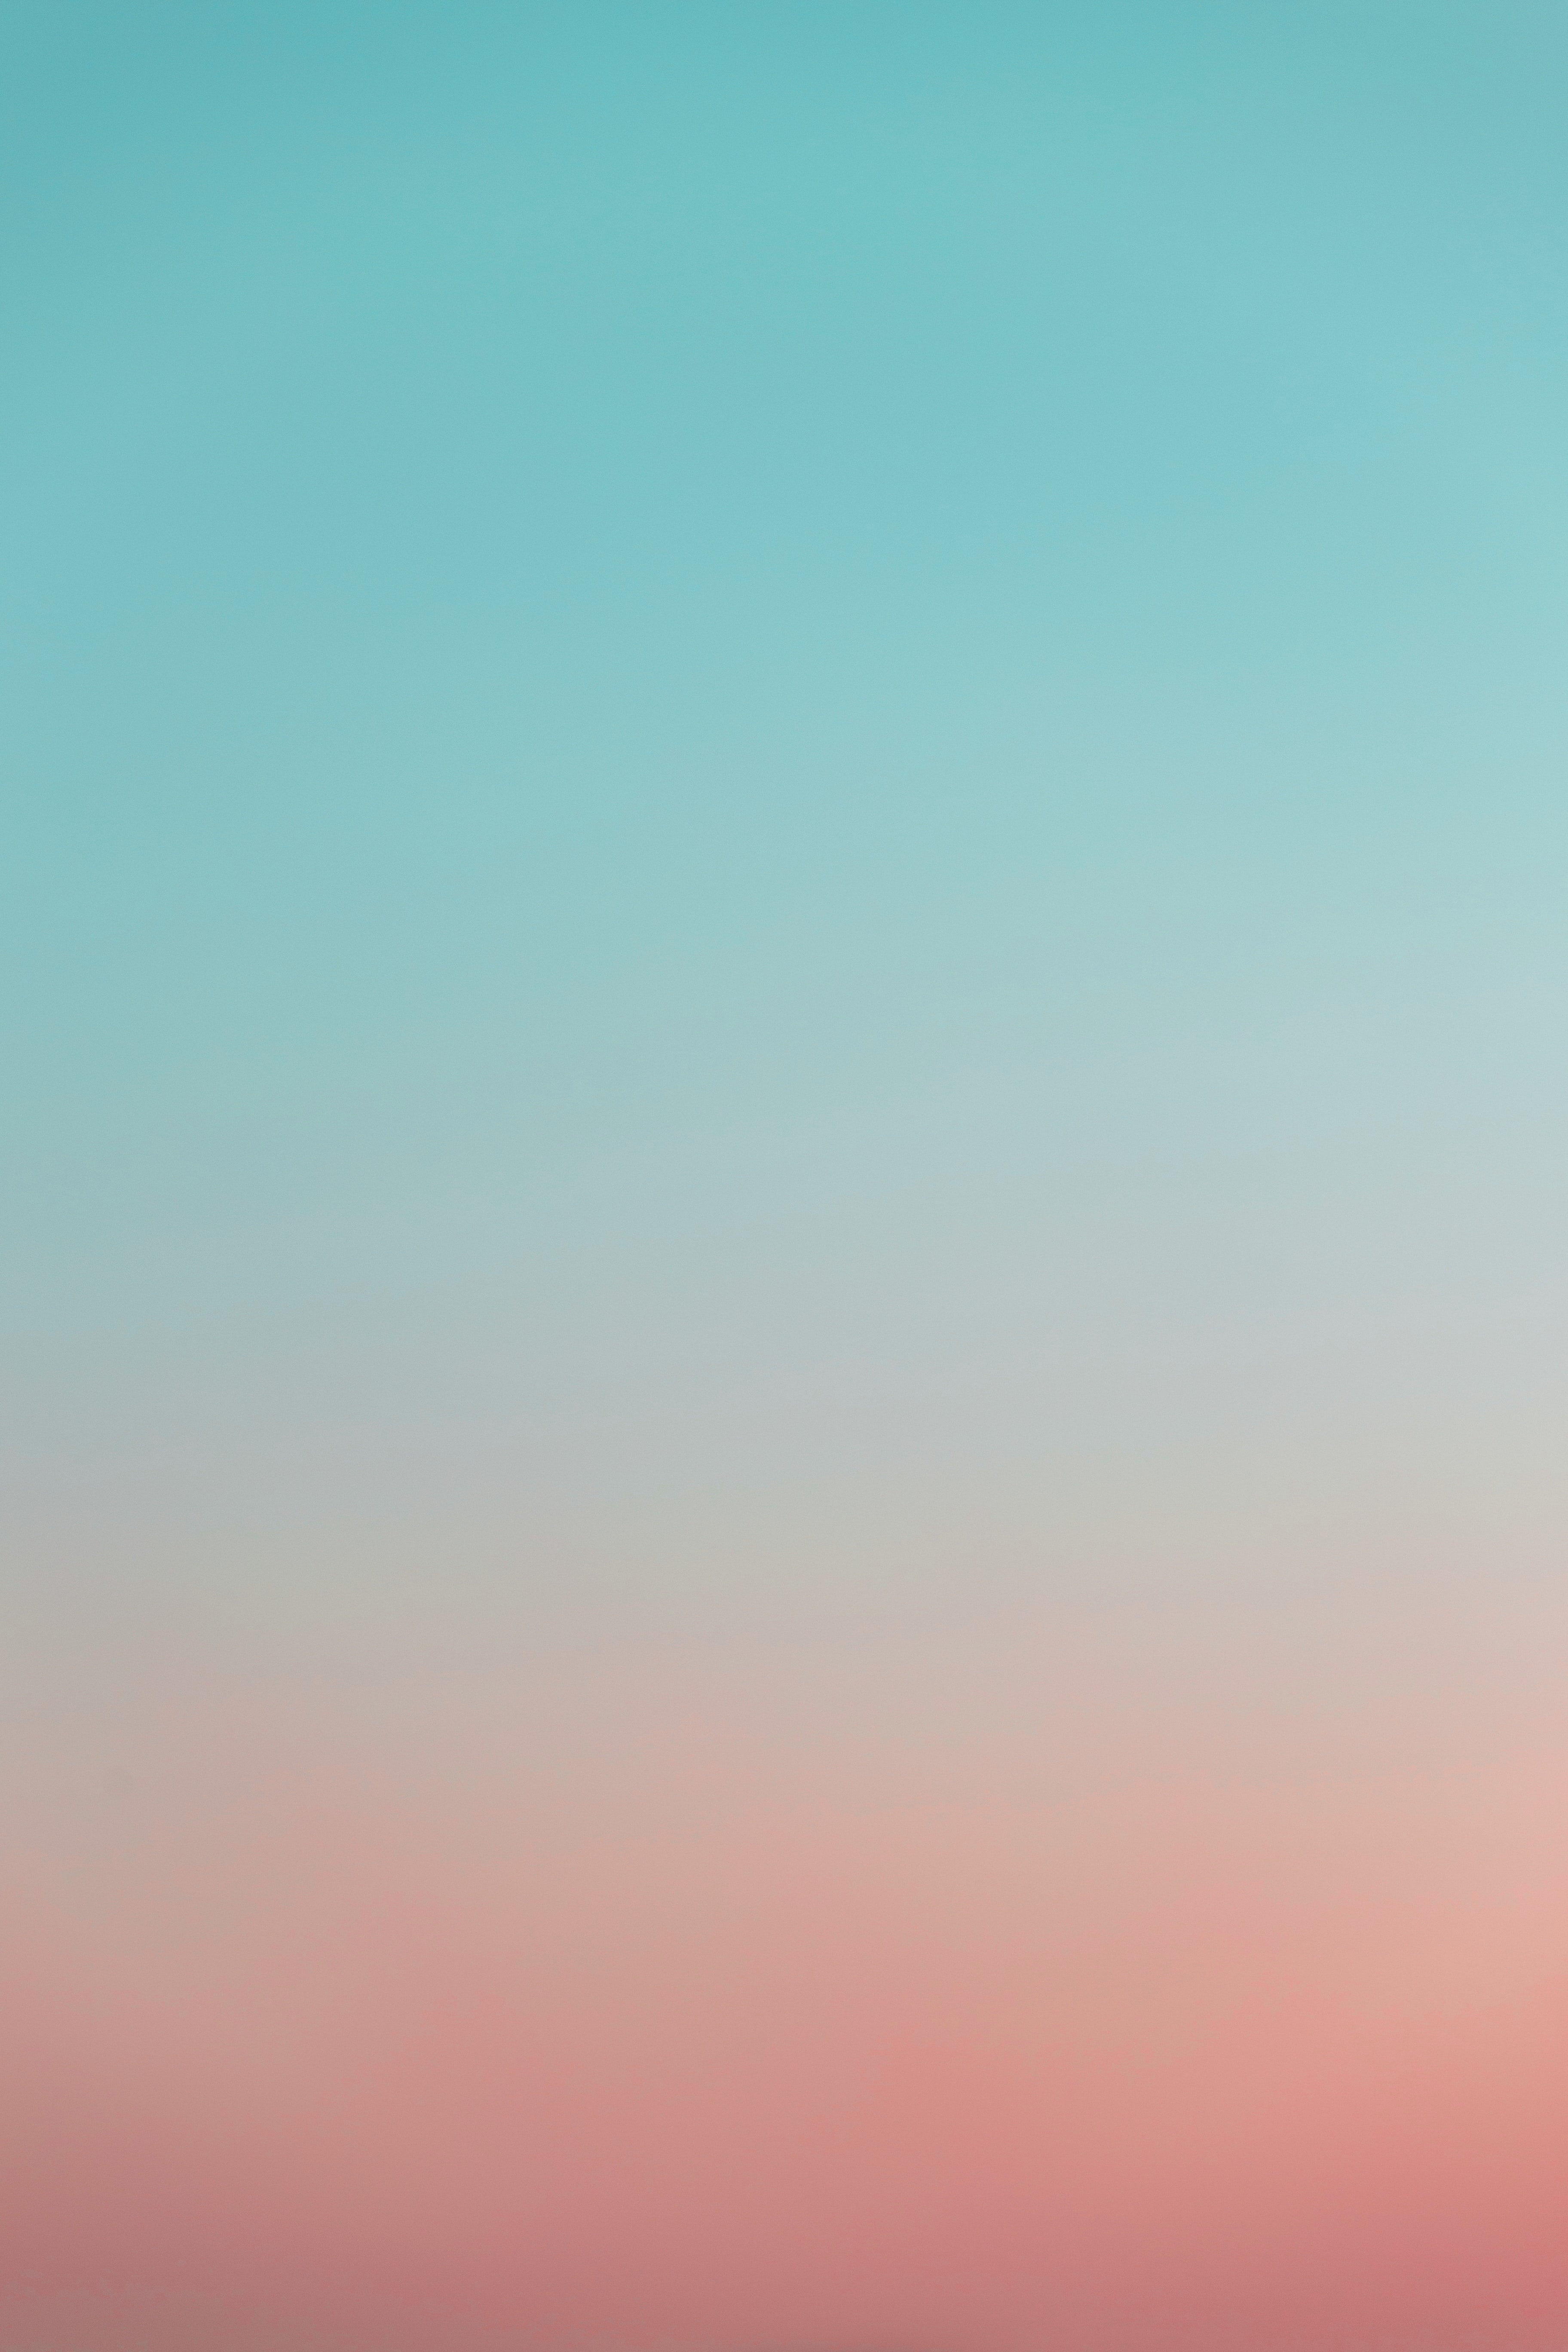 pink, abstract, blue, color, gradient phone background